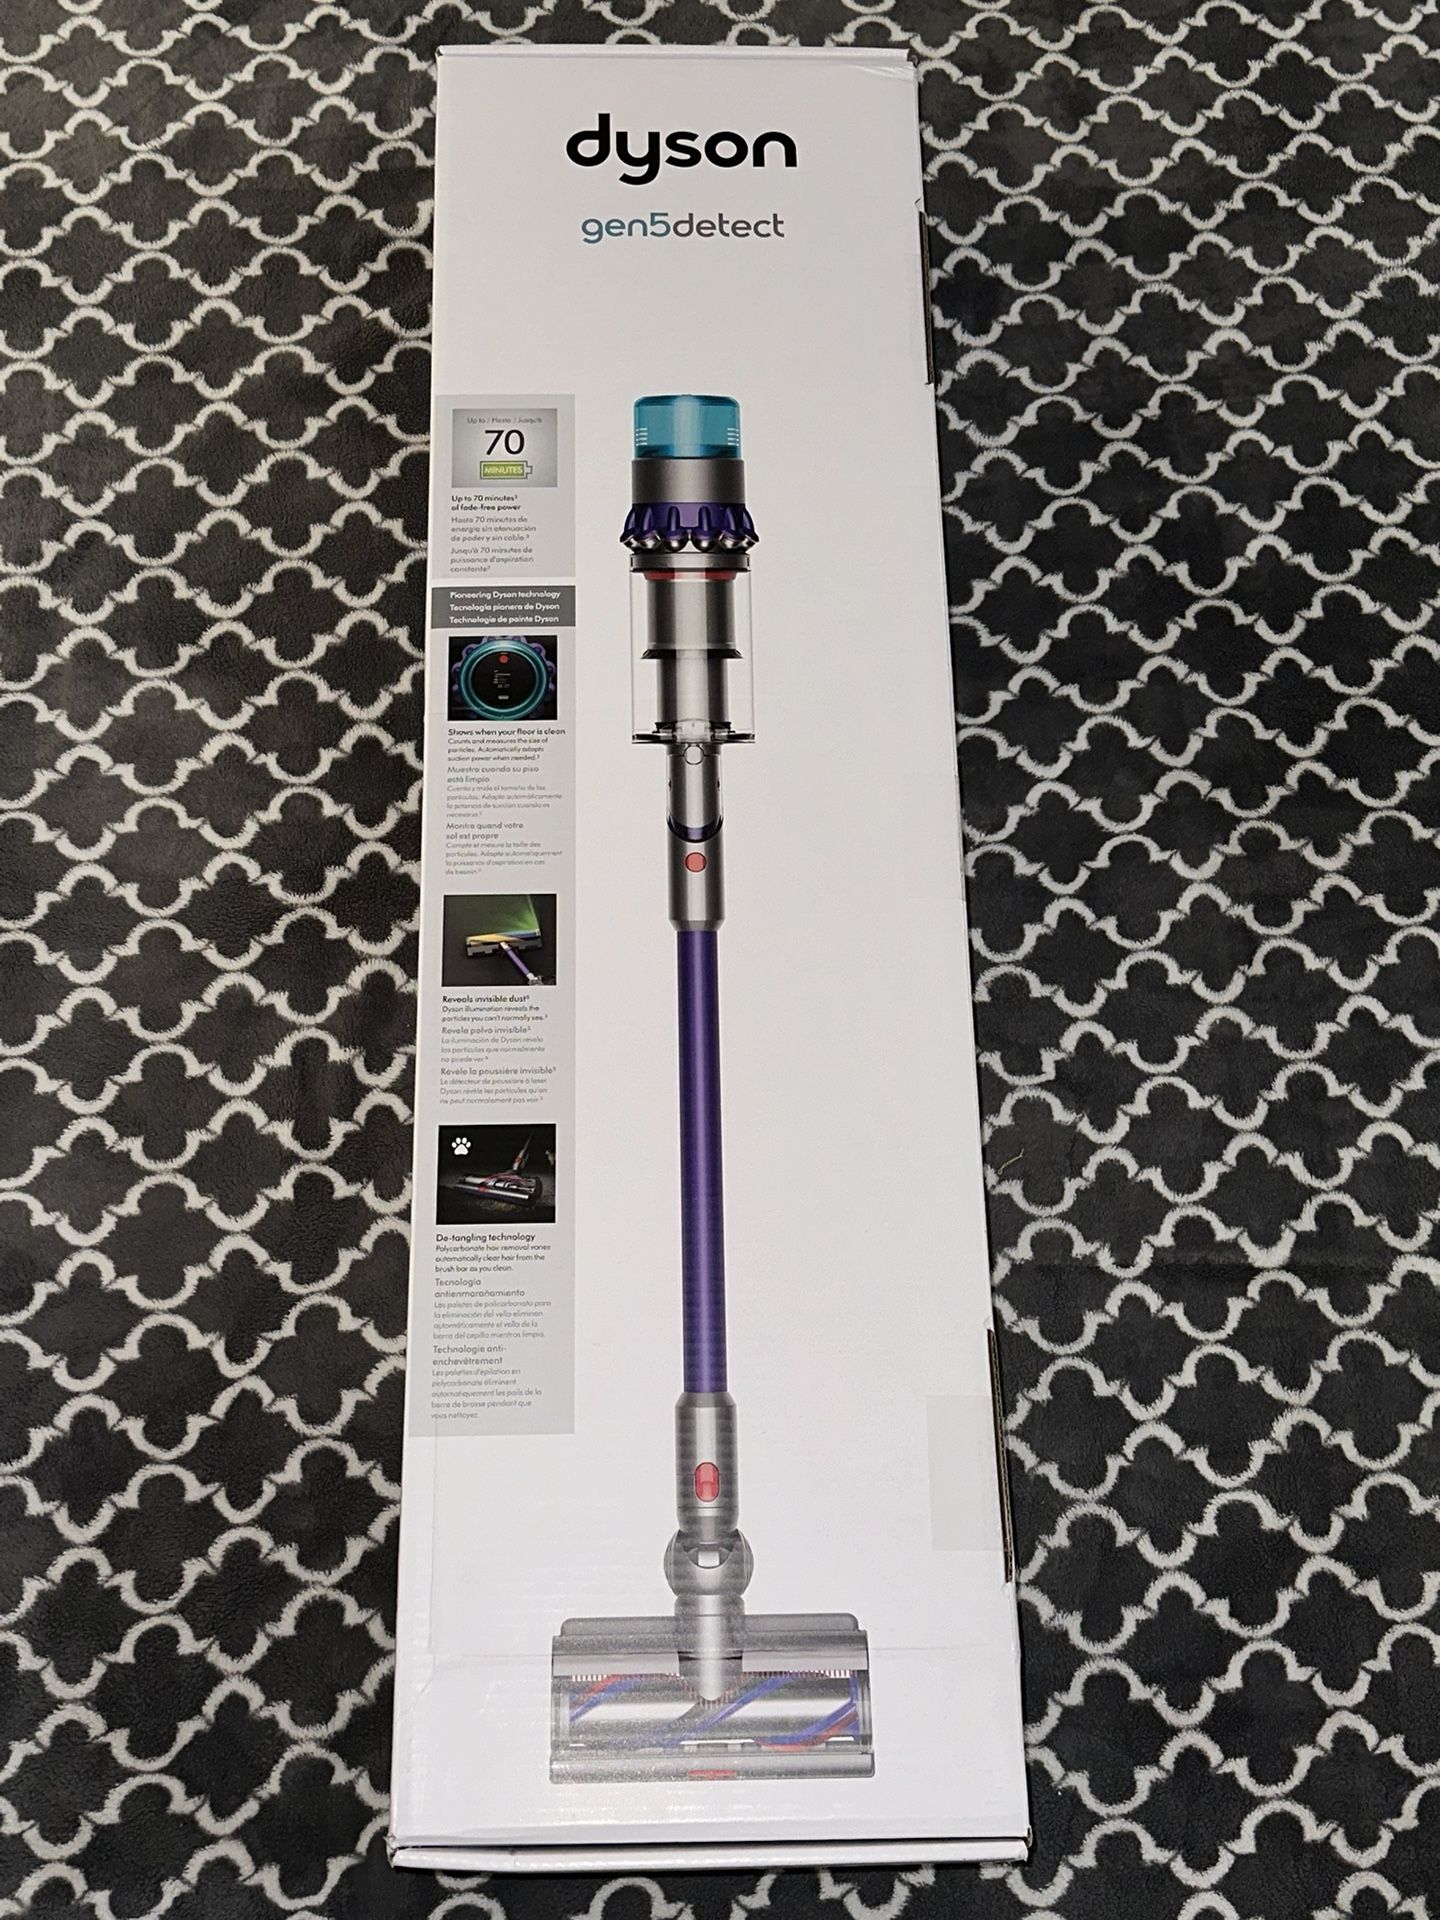 Dyson Gen5detect Cordless Vacuum with 7 accessories (Brand New)